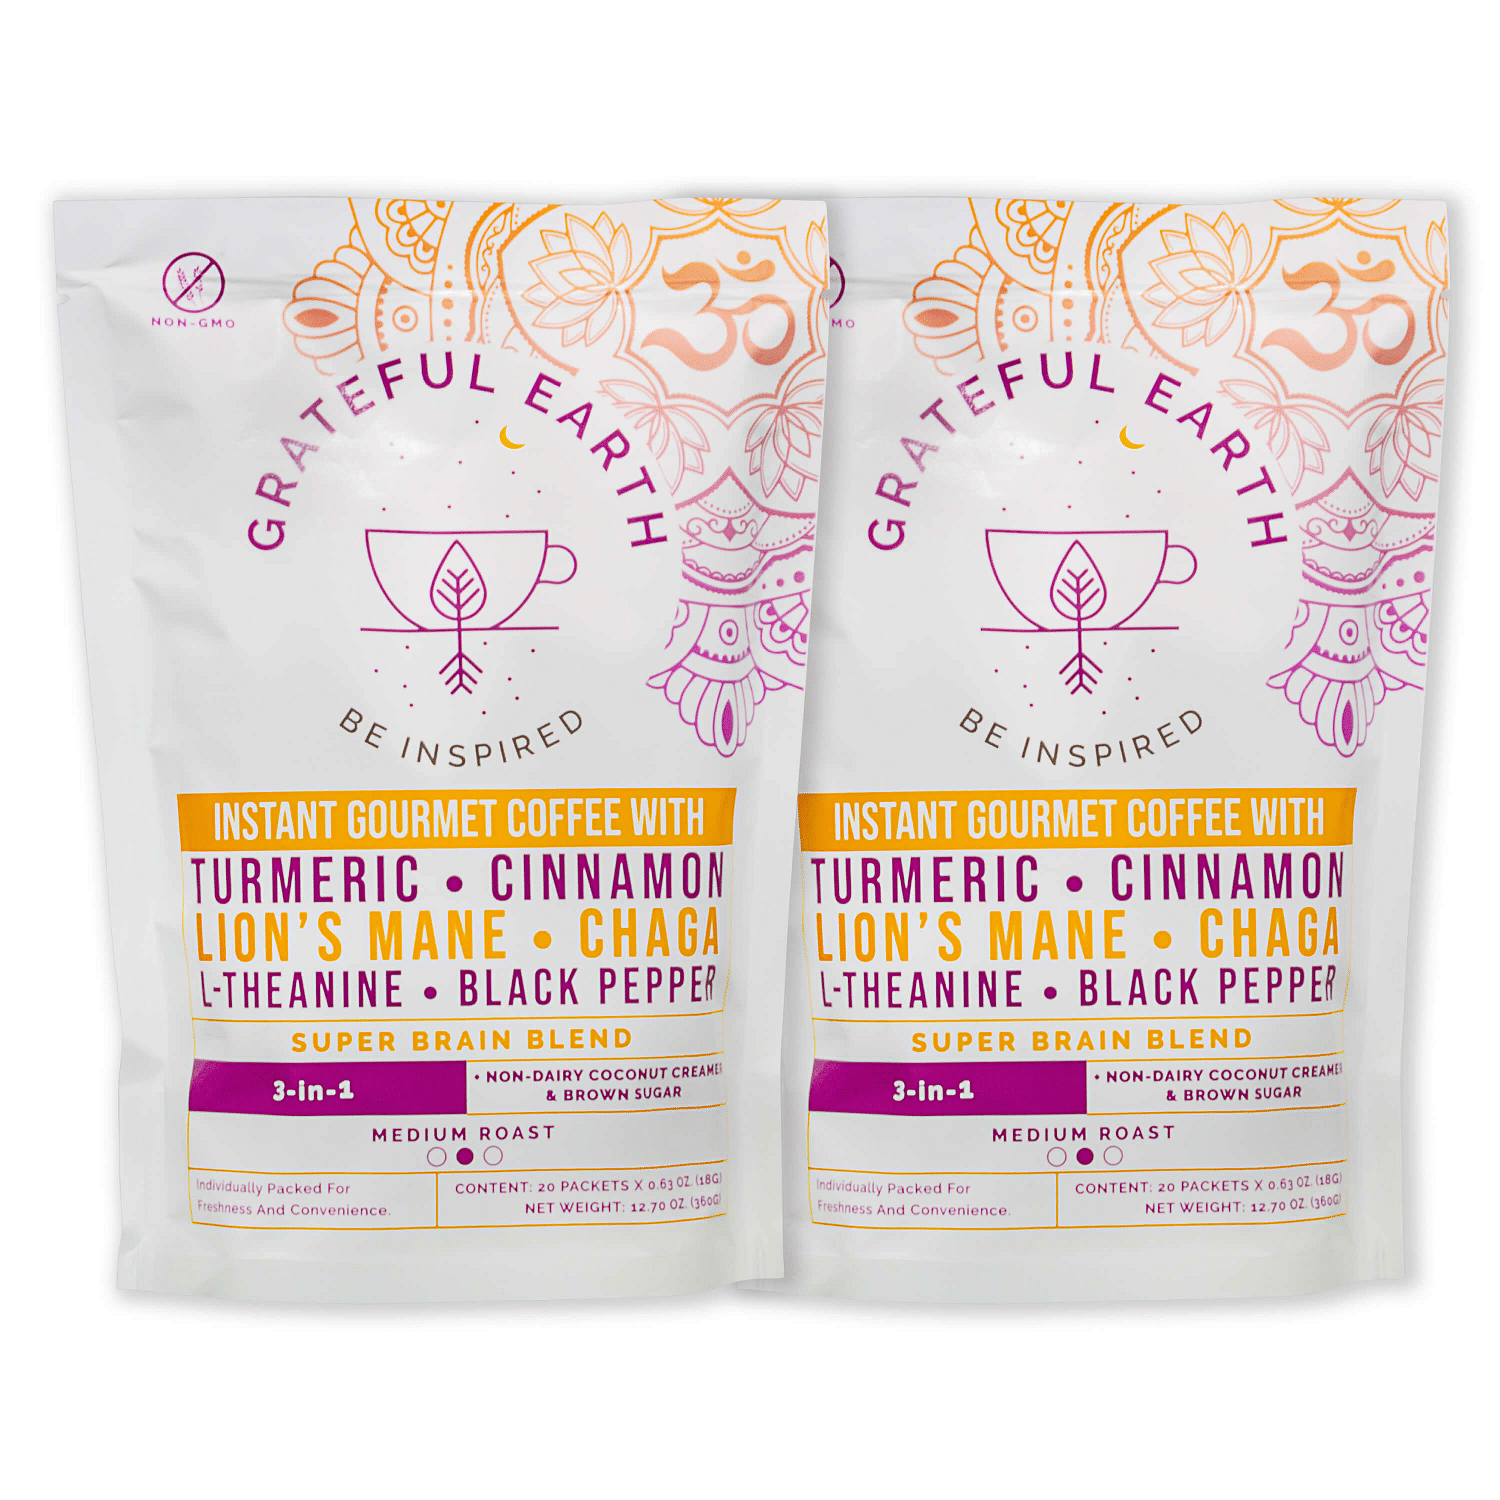 SUBSCRIBE TWO 3-in-1 COFFEES SUPER BRAIN BLEND